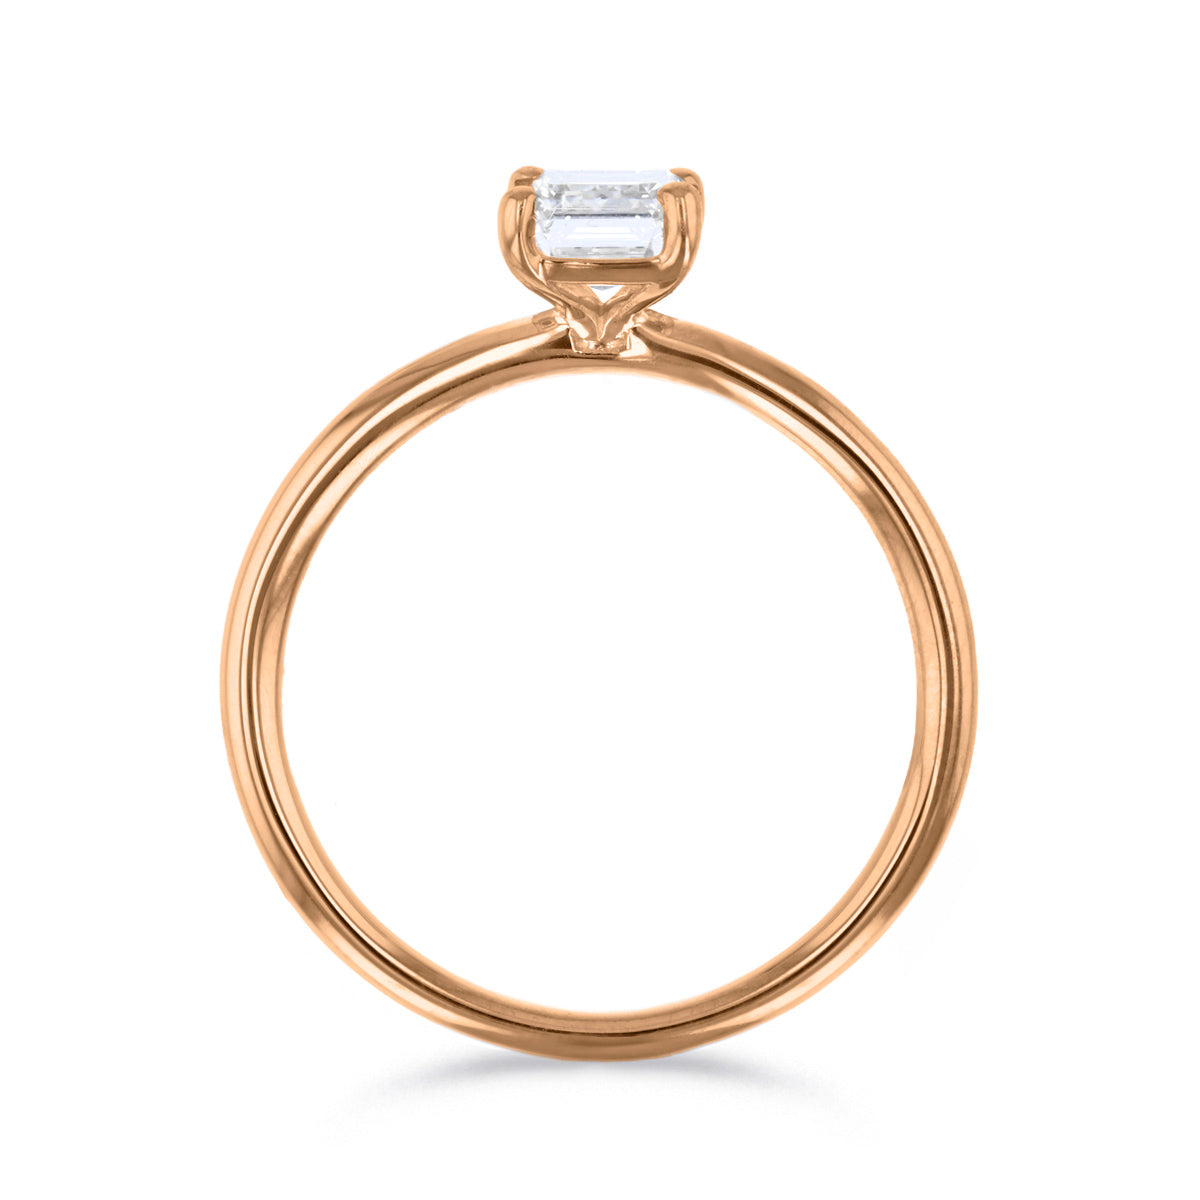 0-25ct-sofia-emerald-cut-solitaire-diamond-engagement-ring-18ct-rose-gold